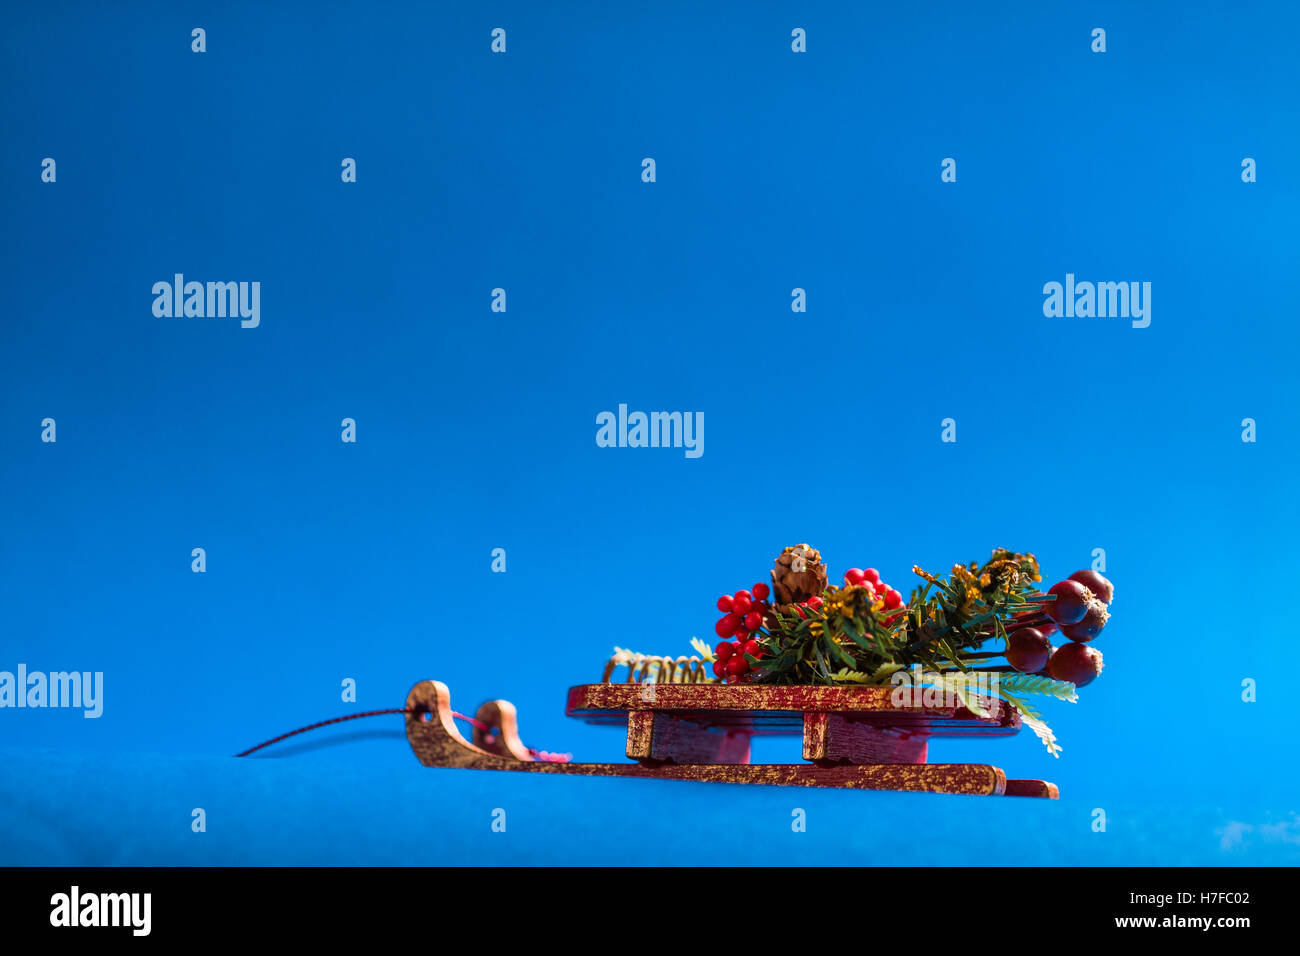 Christmas card with decorative sledge standing on blue background. Stock Photo